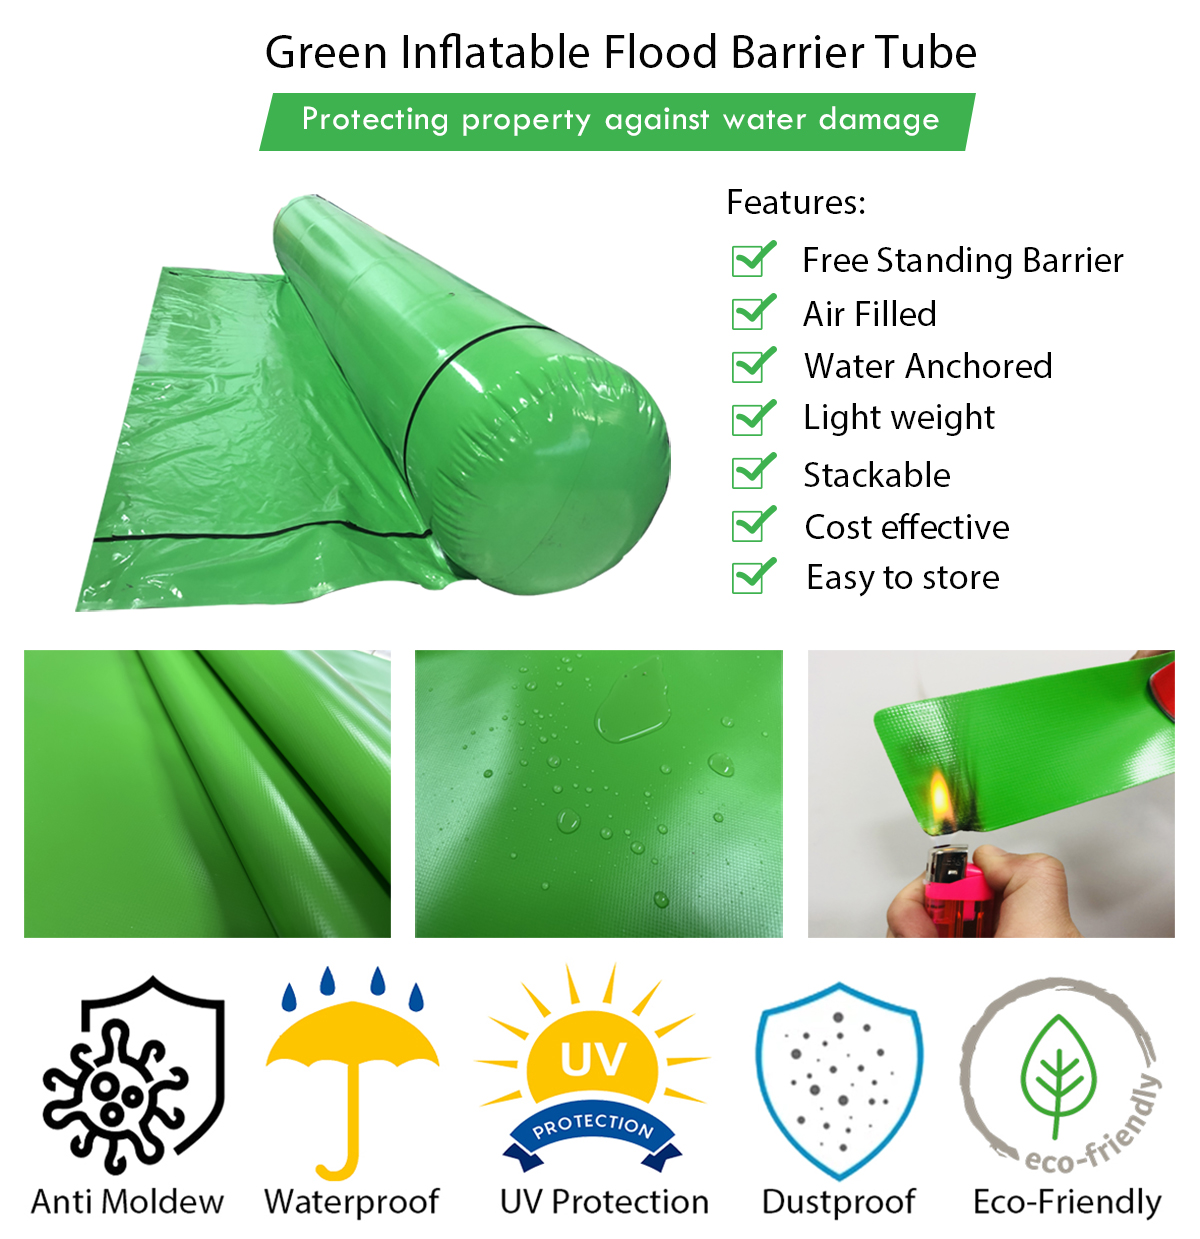 residential flood protection barriers,temporary flood protection barriers,inflatable water barrier,water barrier,green inflatable flood barrier tube